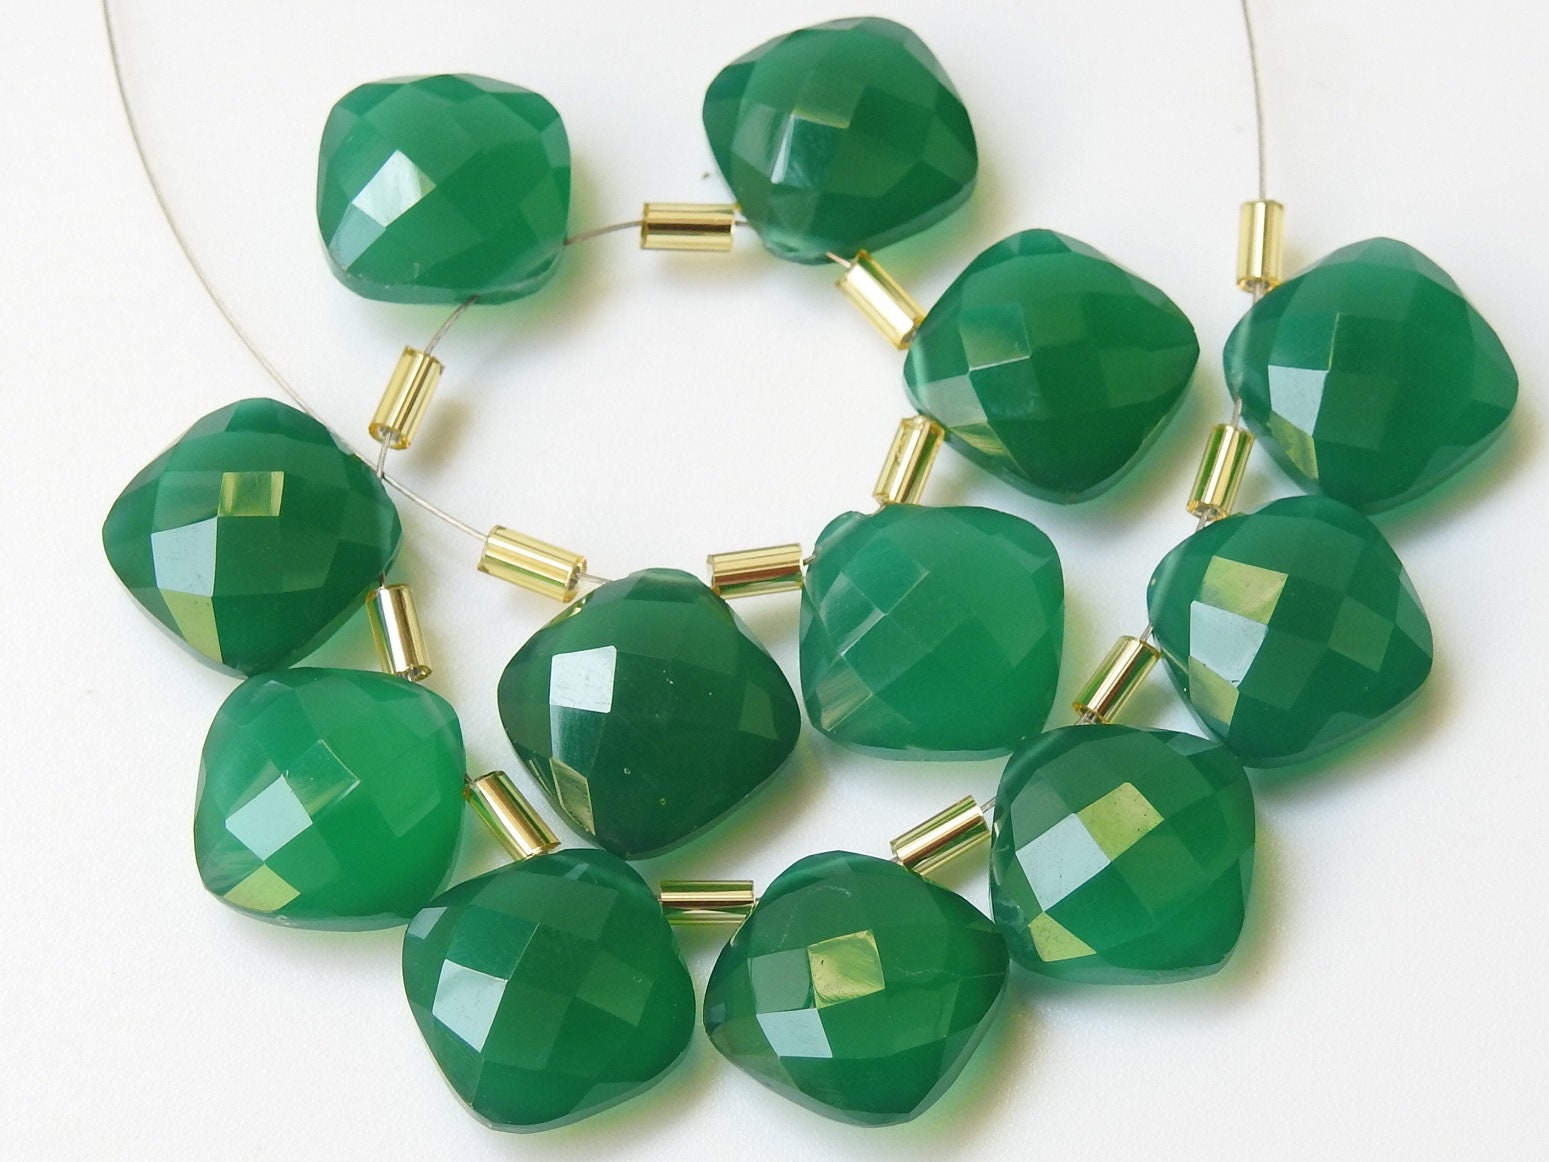 12X12MM Pair,Green Onyx Faceted Cushions,Square Shape Briolette,Teardrop,Loose Stone,Earrings Jewelry,Wholesaler,Supplies PME-CY1 | Save 33% - Rajasthan Living 17